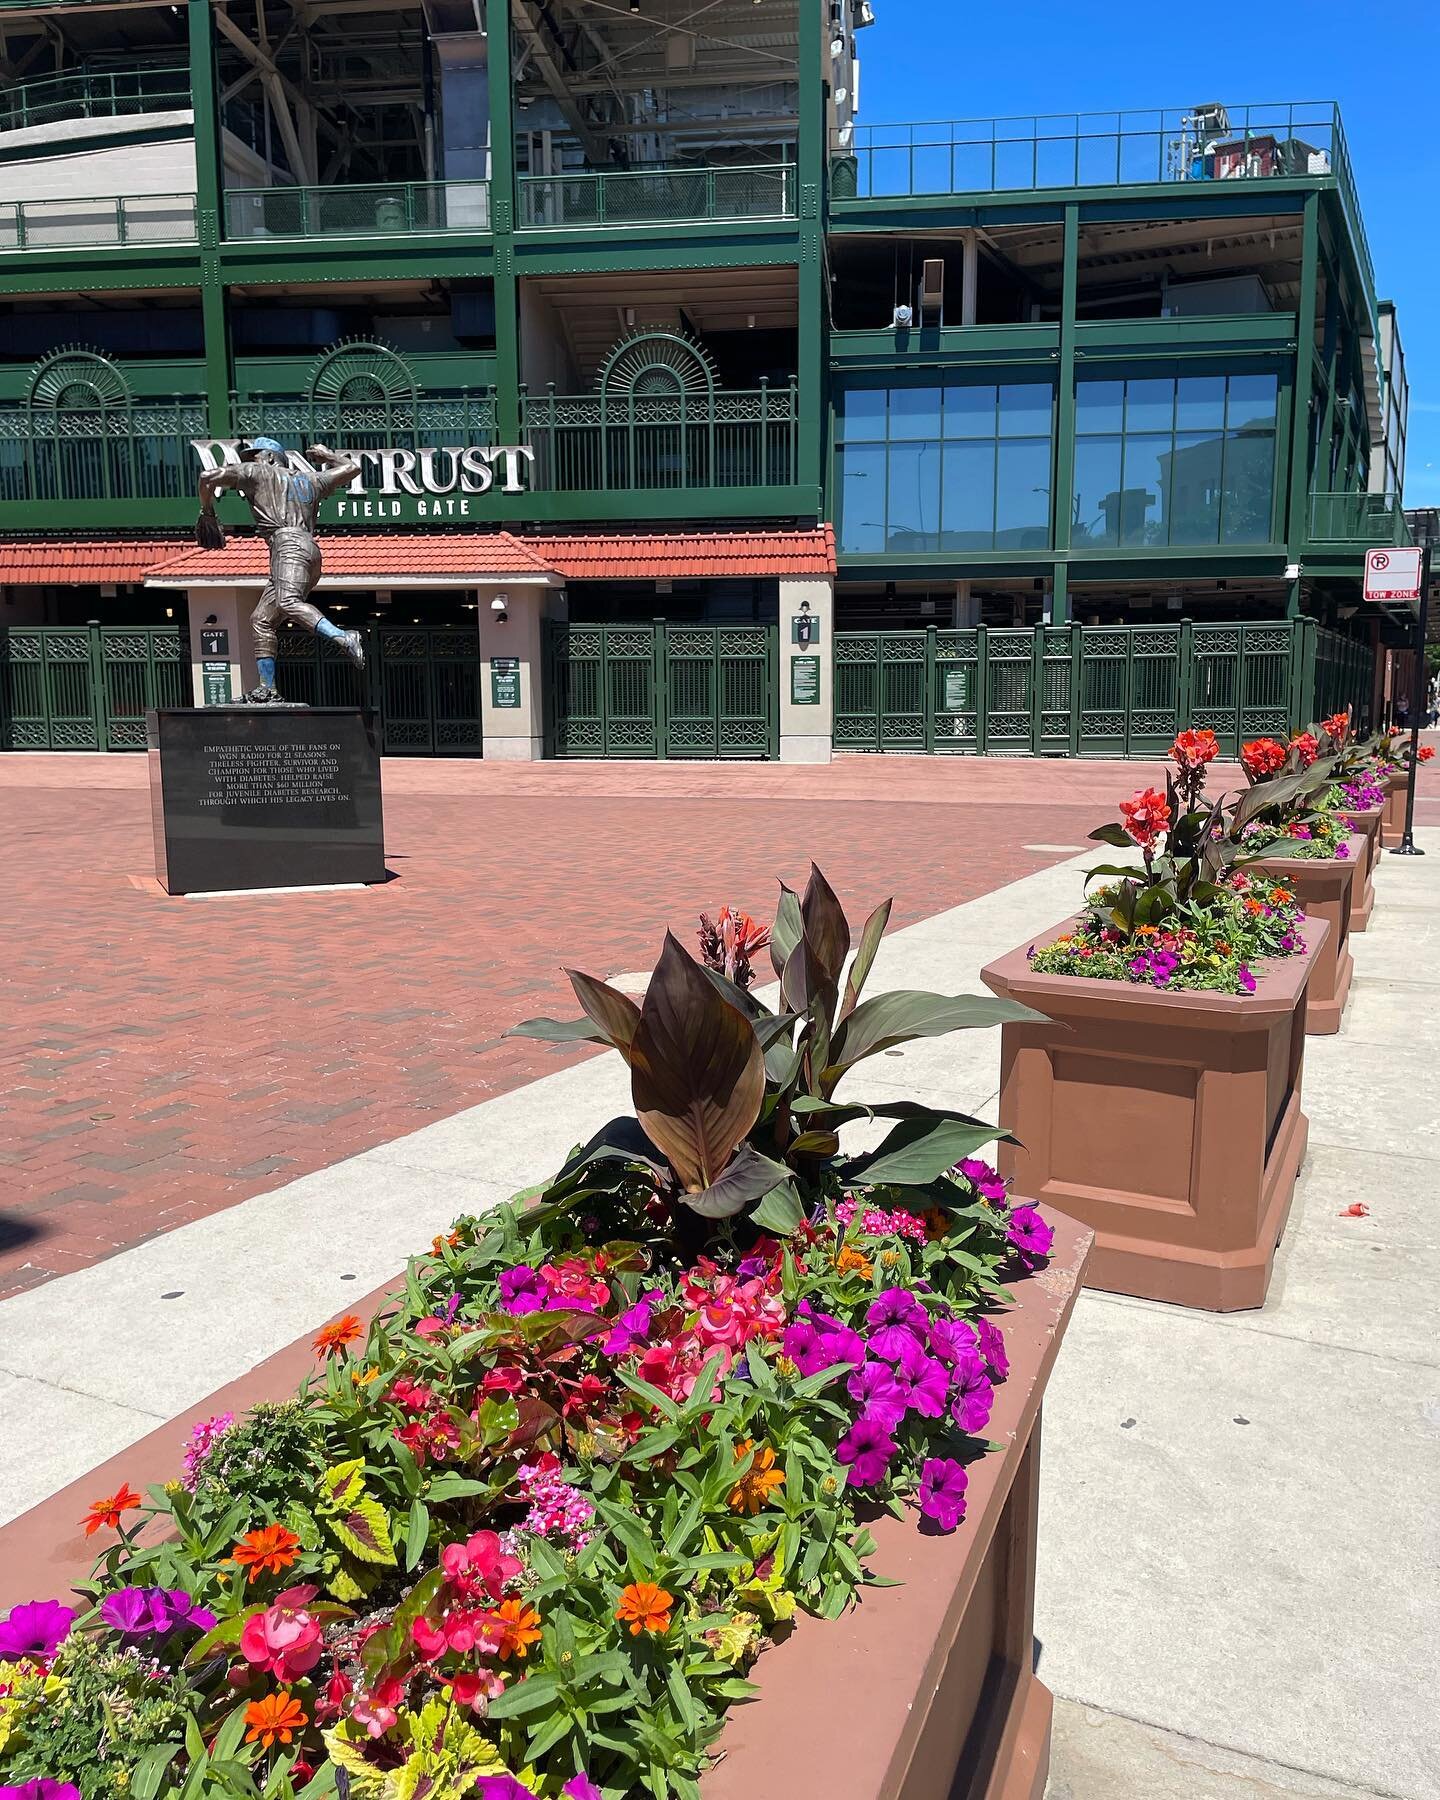 We work with commercial properties across the Chicagoland area to produce high-quality landscapes that look and feel great. By providing our landscape services through all seasons, Chicago landmarks stay looking at their best. 

#wrigleyfield #wrigle